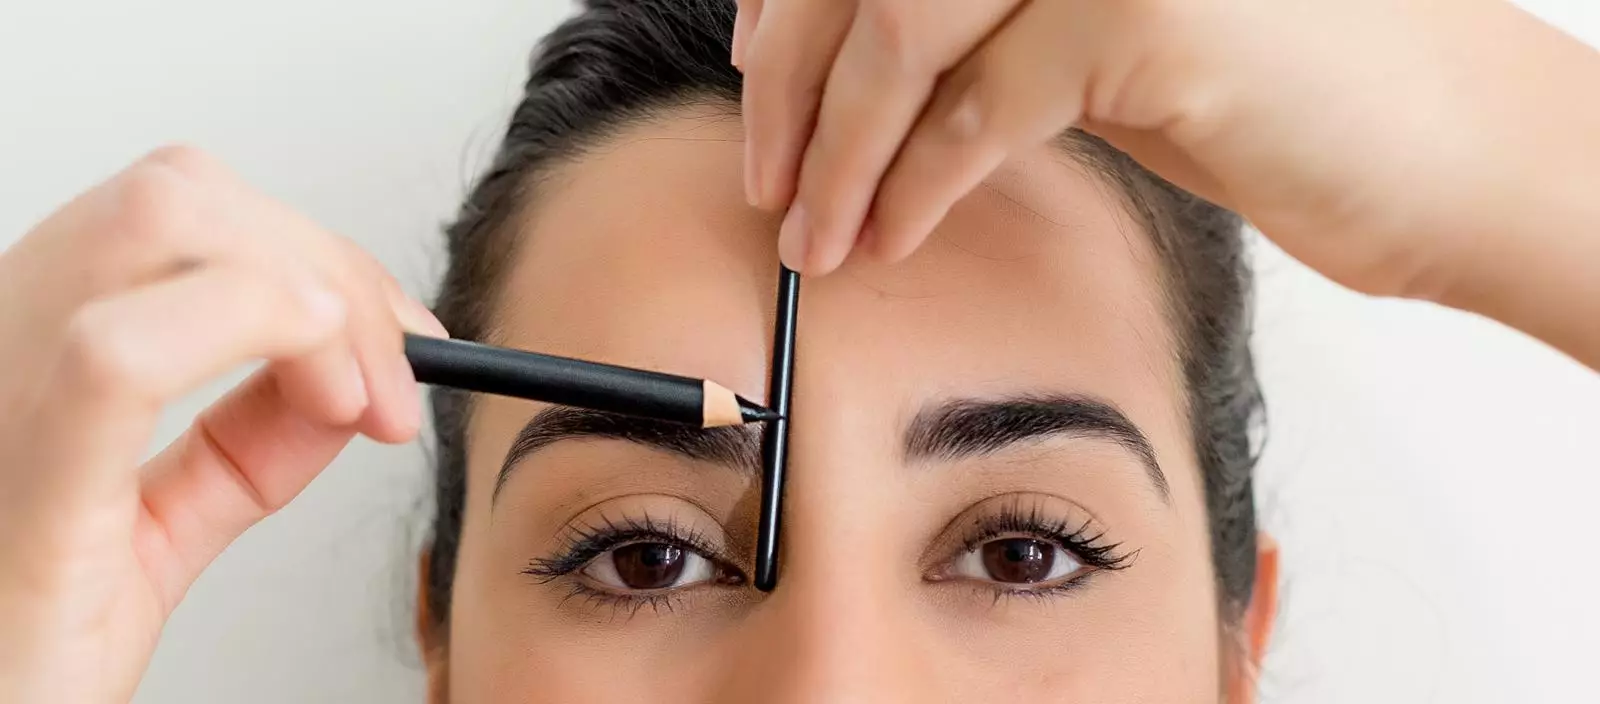 Use a sharp pencil and ruler to align the inner edges of your brows with the bridge of your nose to map out your desired shape (